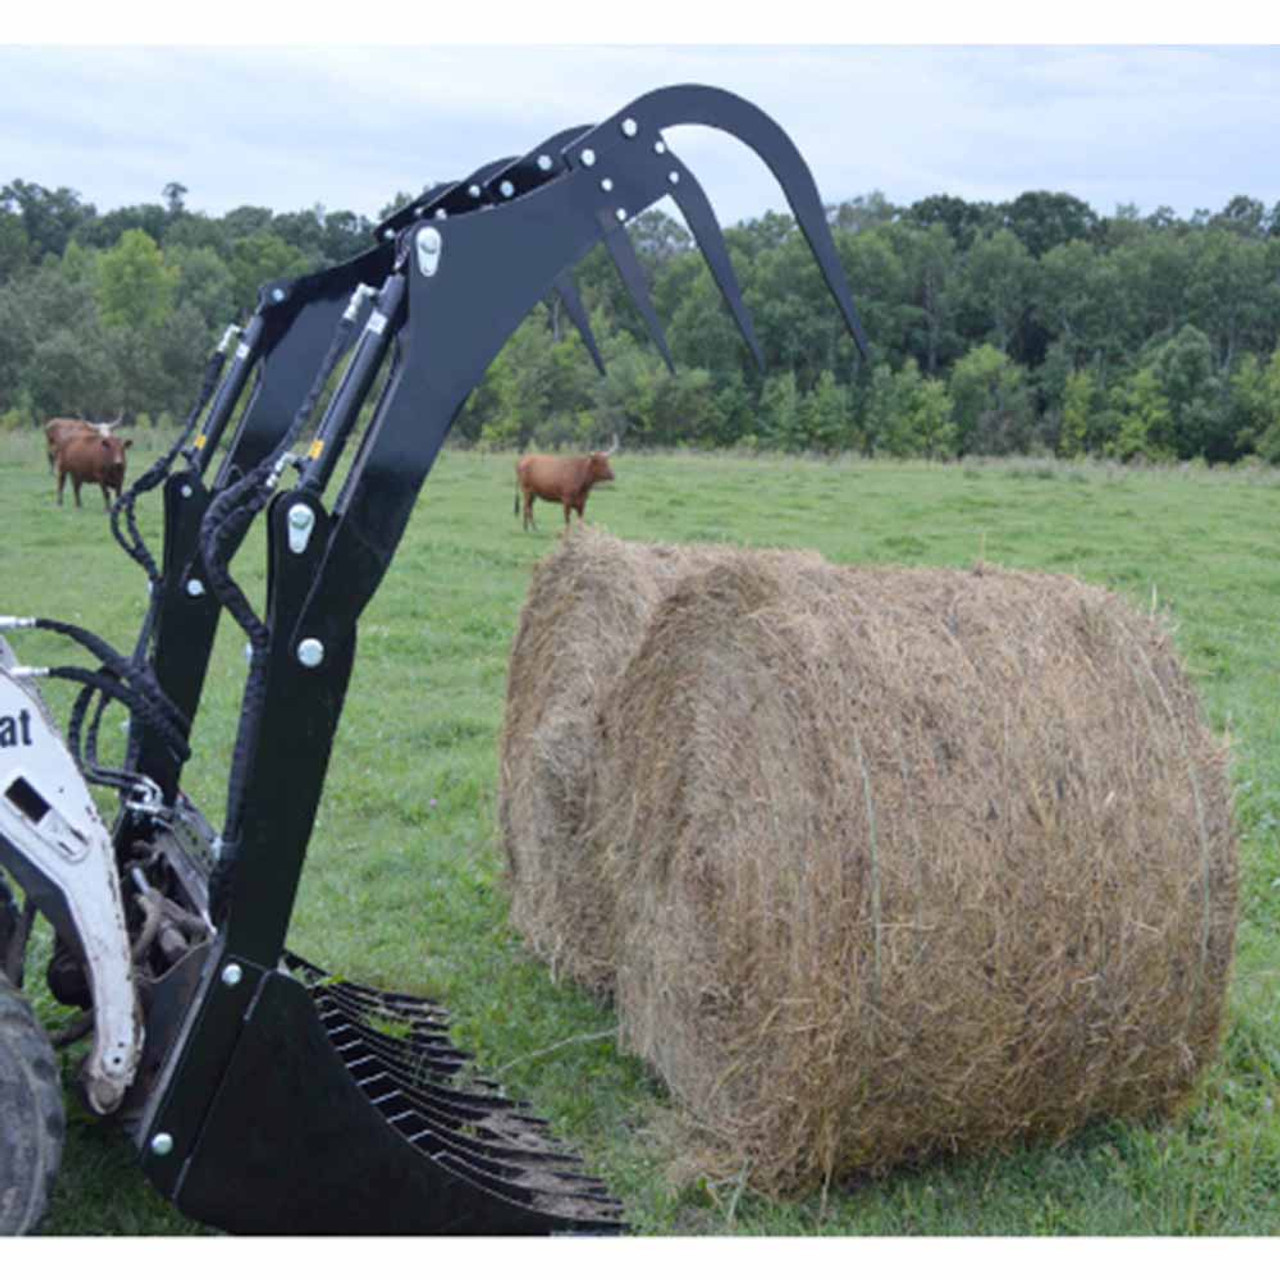 Tough-1 Hay and Straw Bale Cutter at Tractor Supply Co.